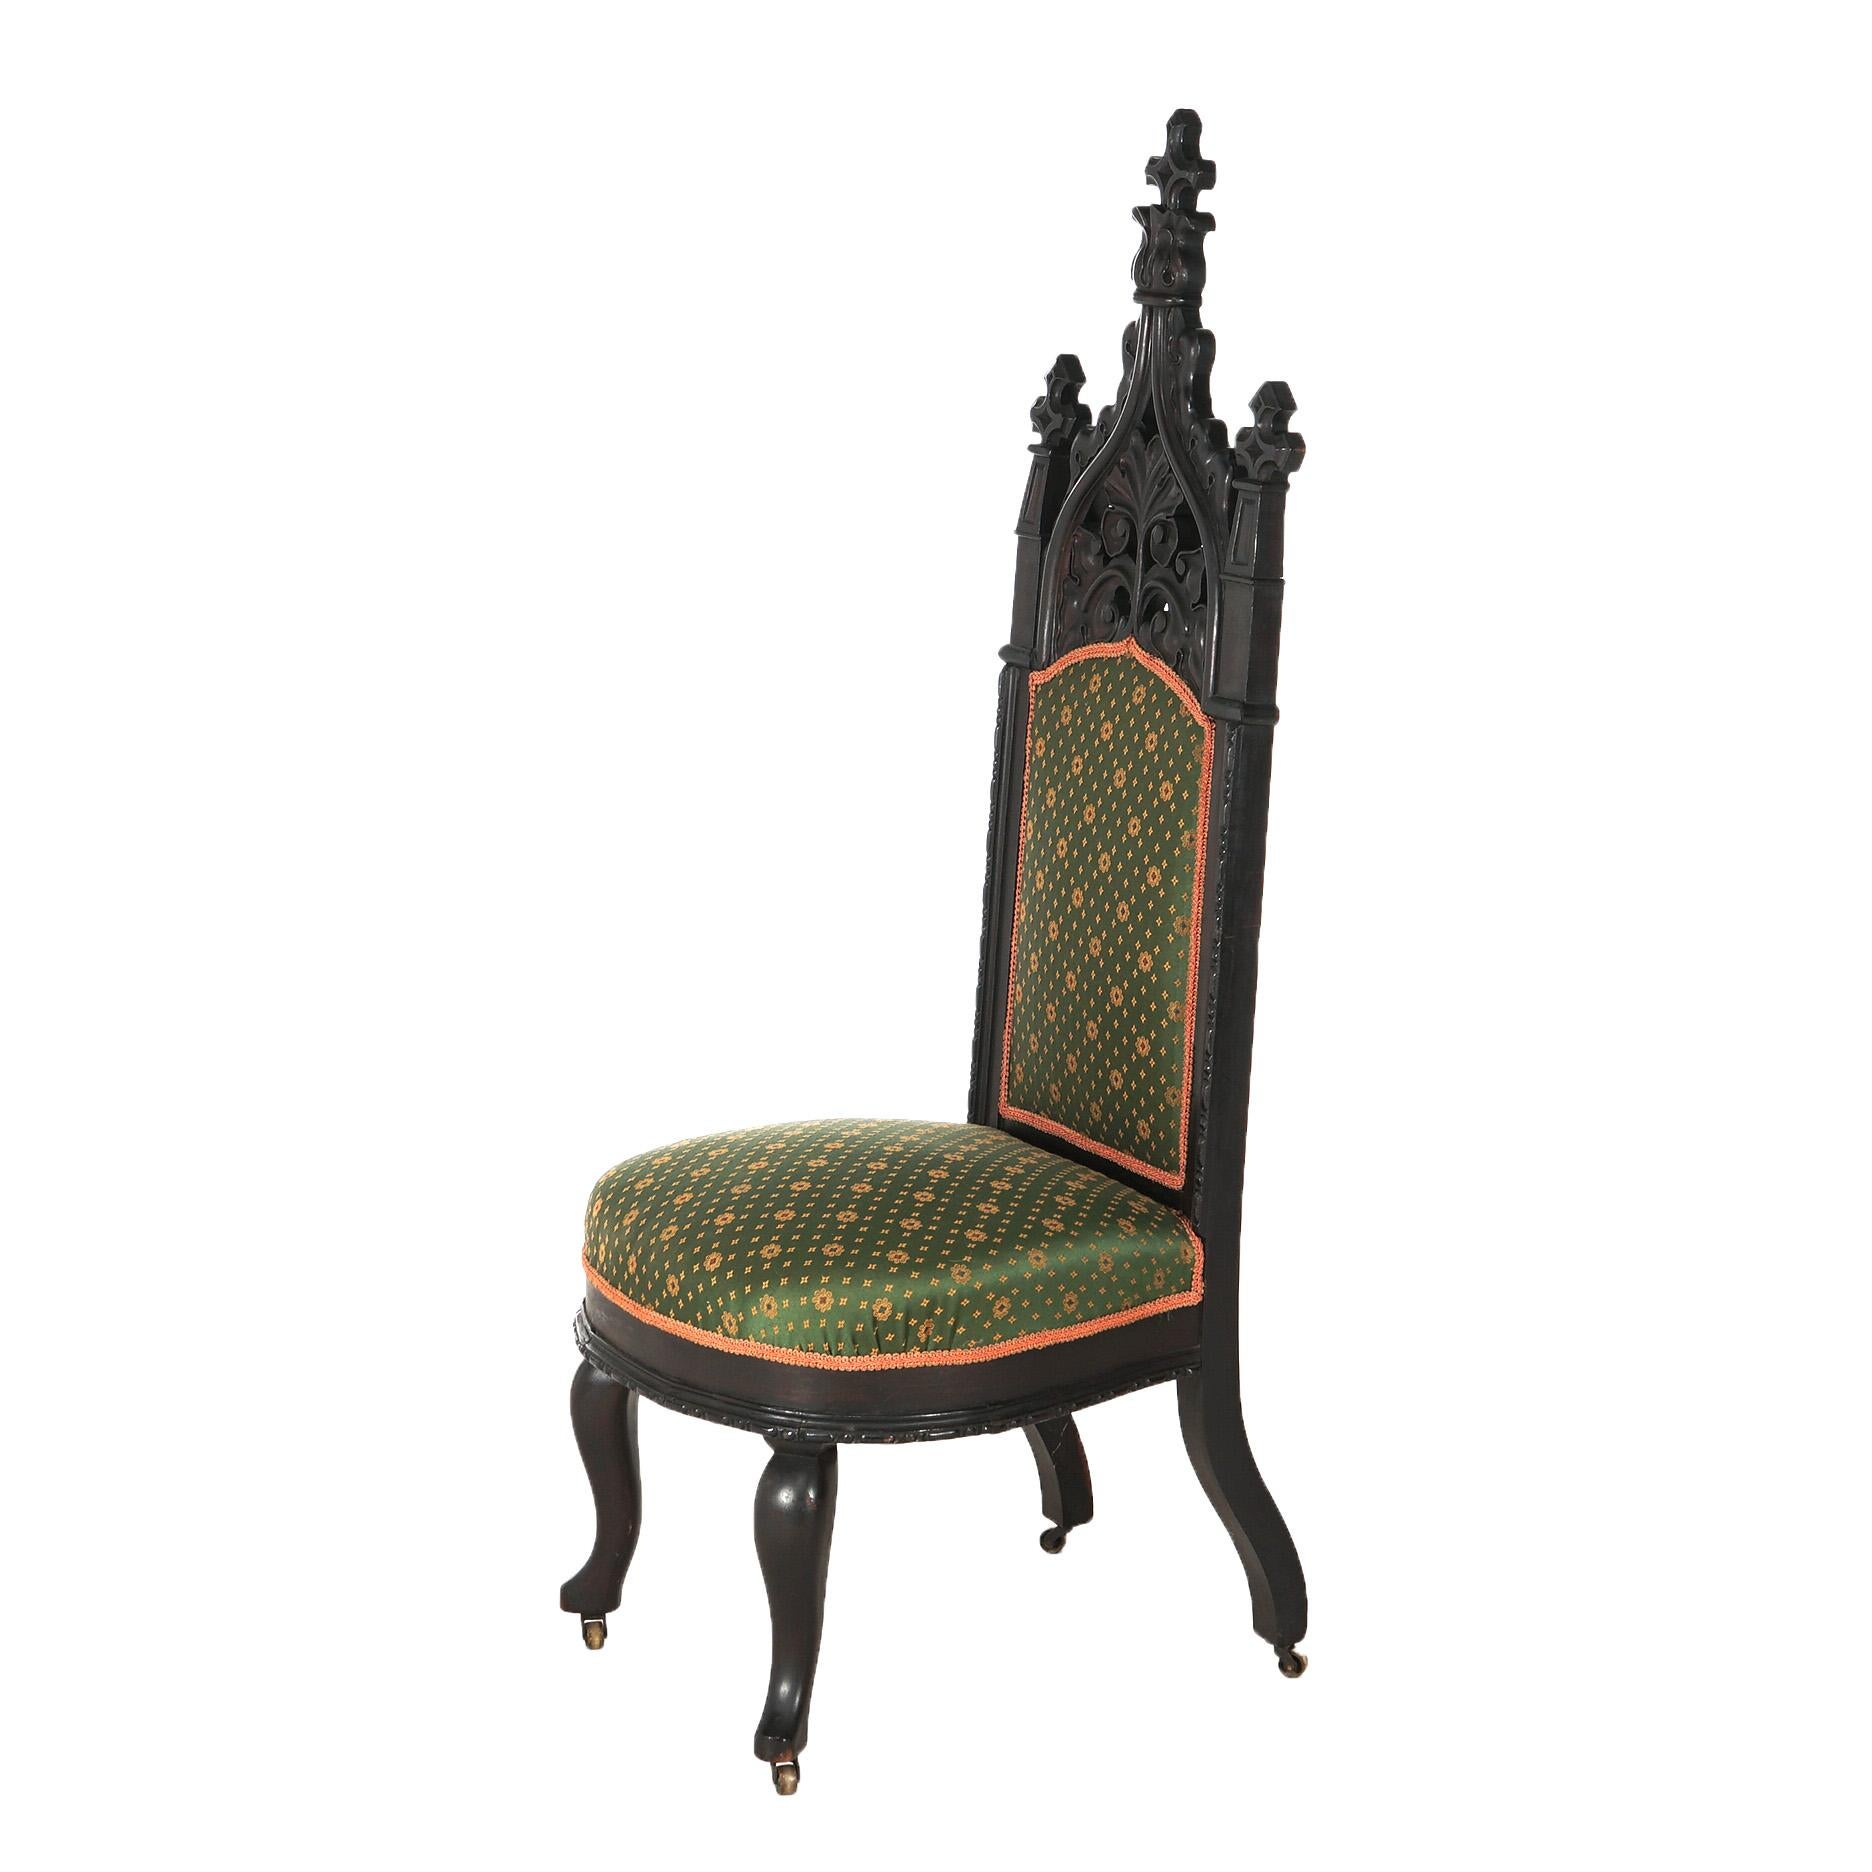 Antique Gothic Revival Ebonized & Carved Walnut Upholstered Throne Chair C1860 For Sale 1